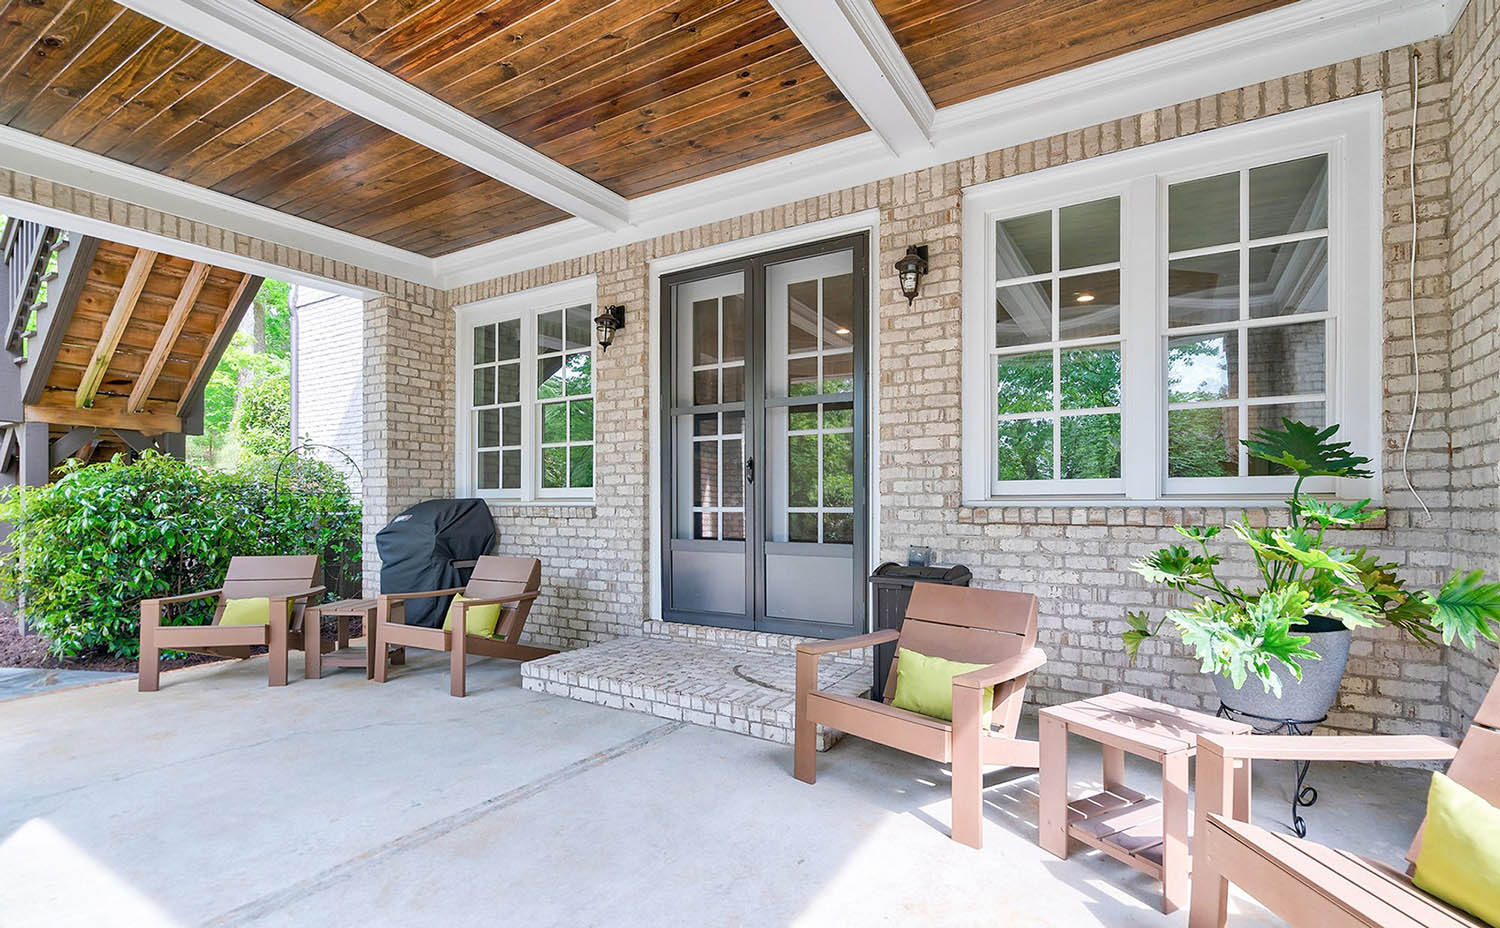 Outdoor covered patio with tan brick walls. Outdoor coffered ceiling, white beams with beadboard.